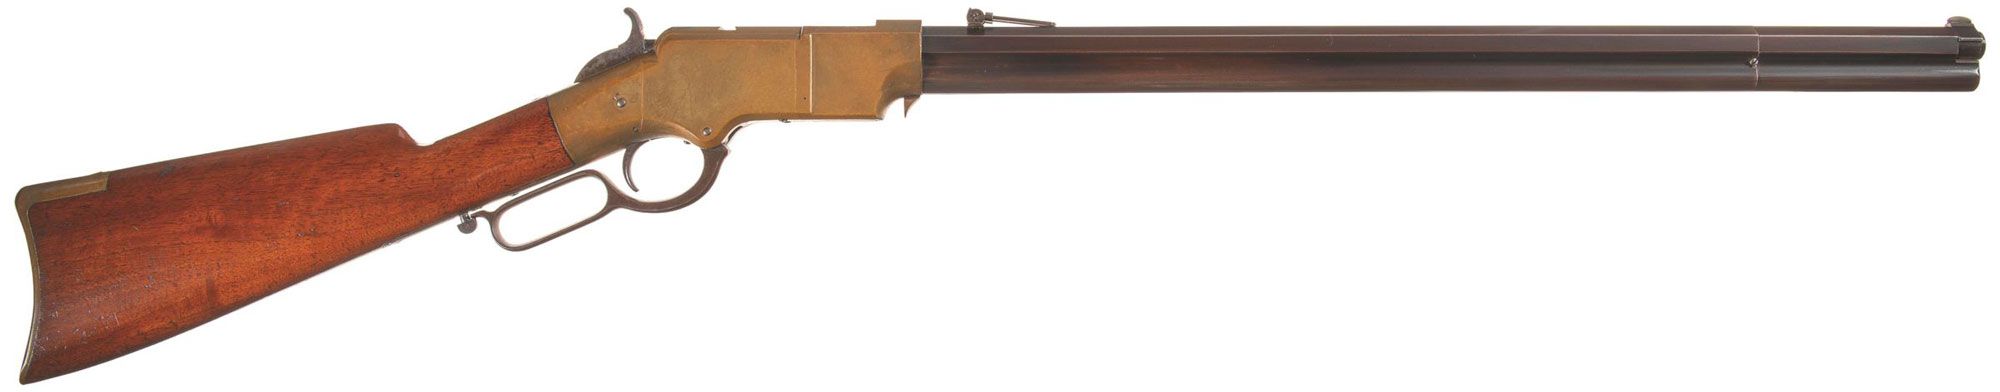 Lot 4011: New Haven Arms Co. Henry Lever Action Rifle